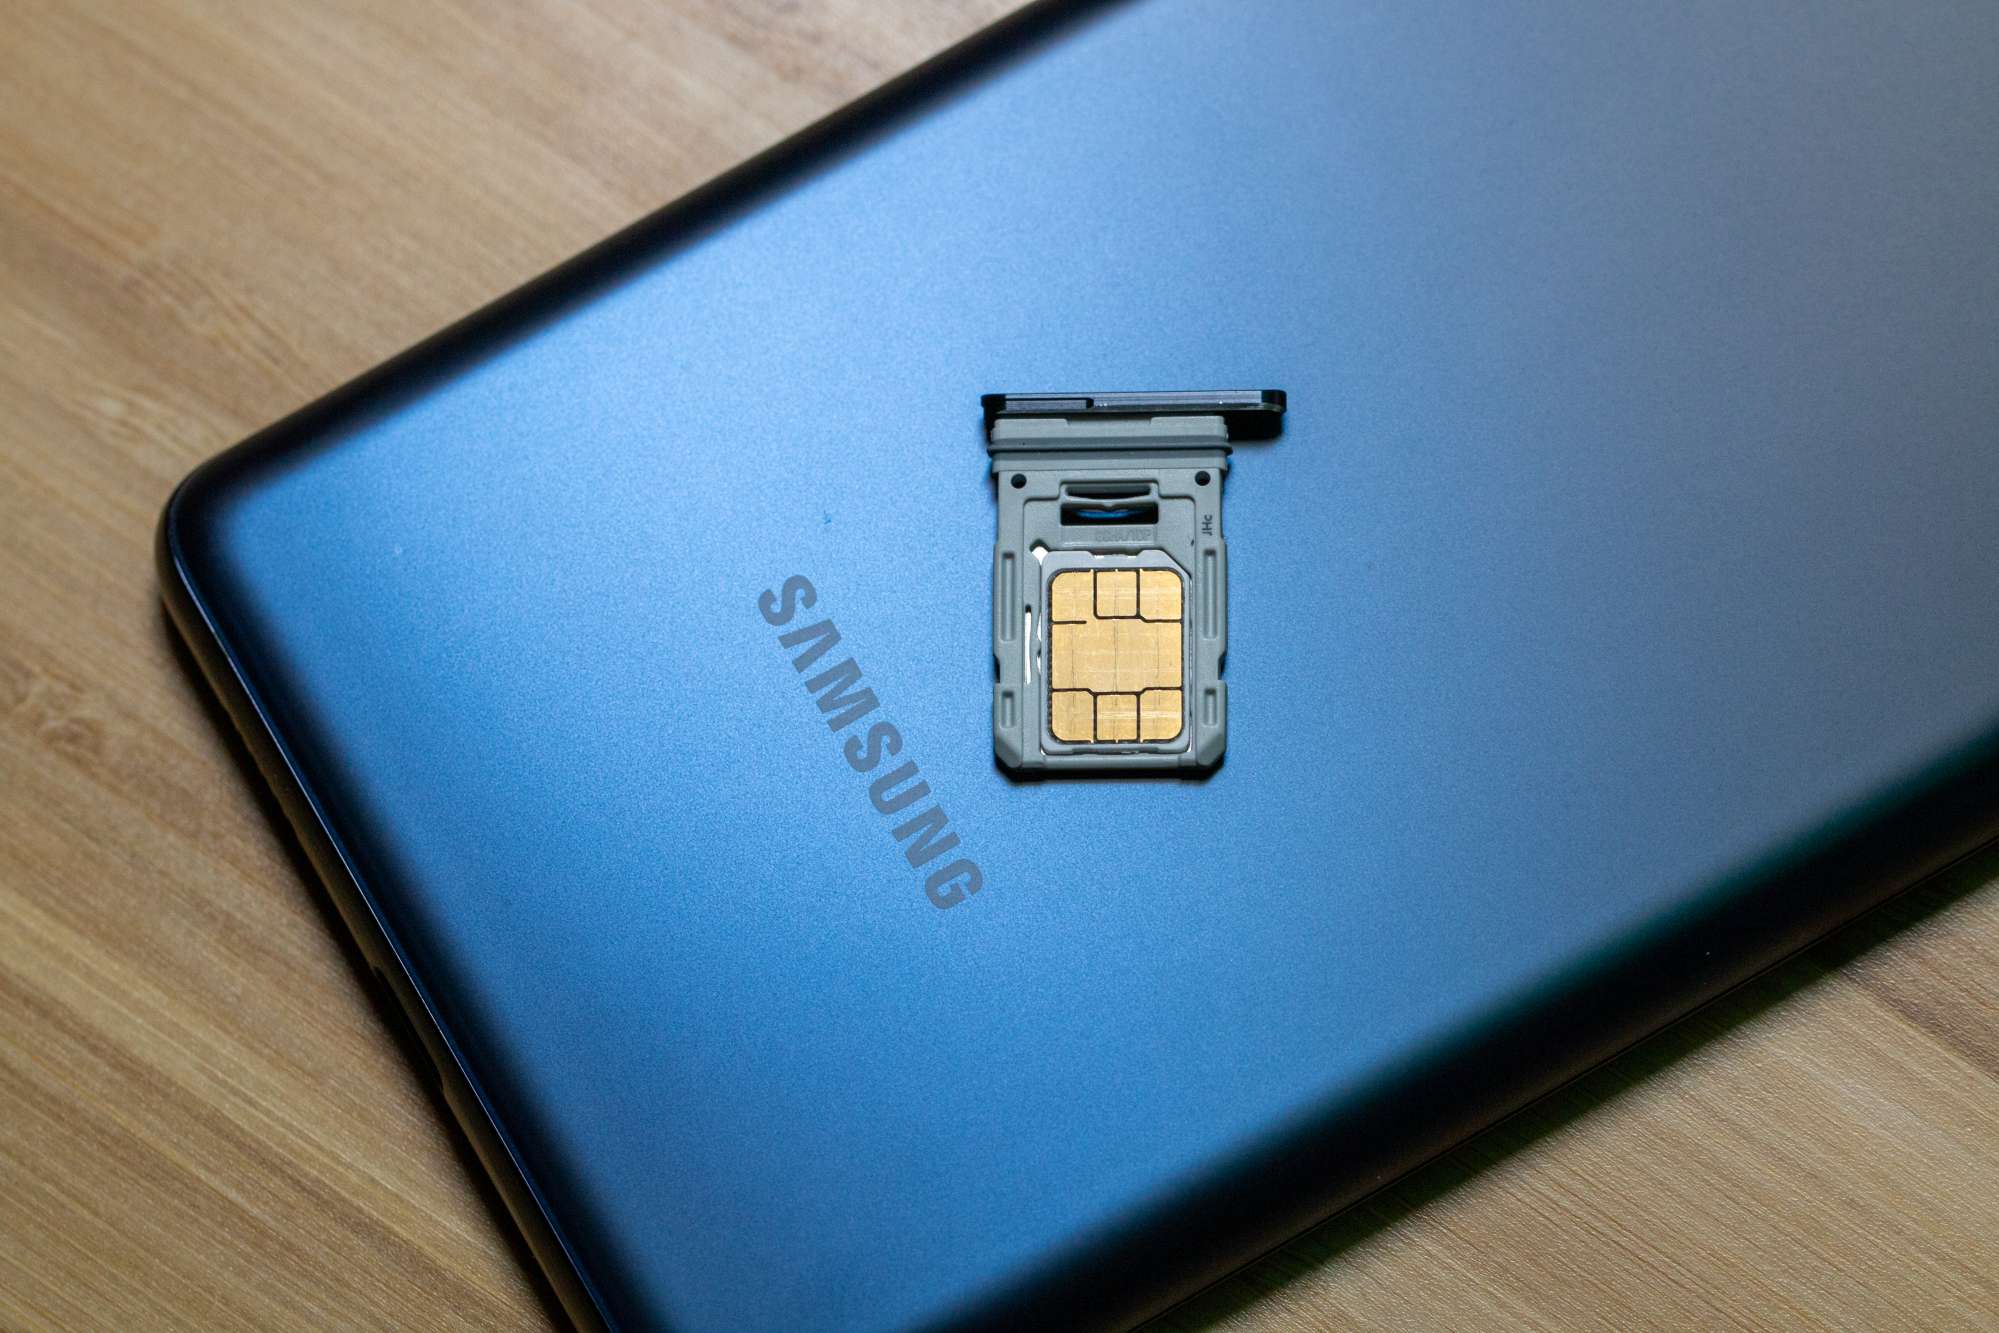 SIM Card Removal On Samsung S20: A Quick Guide